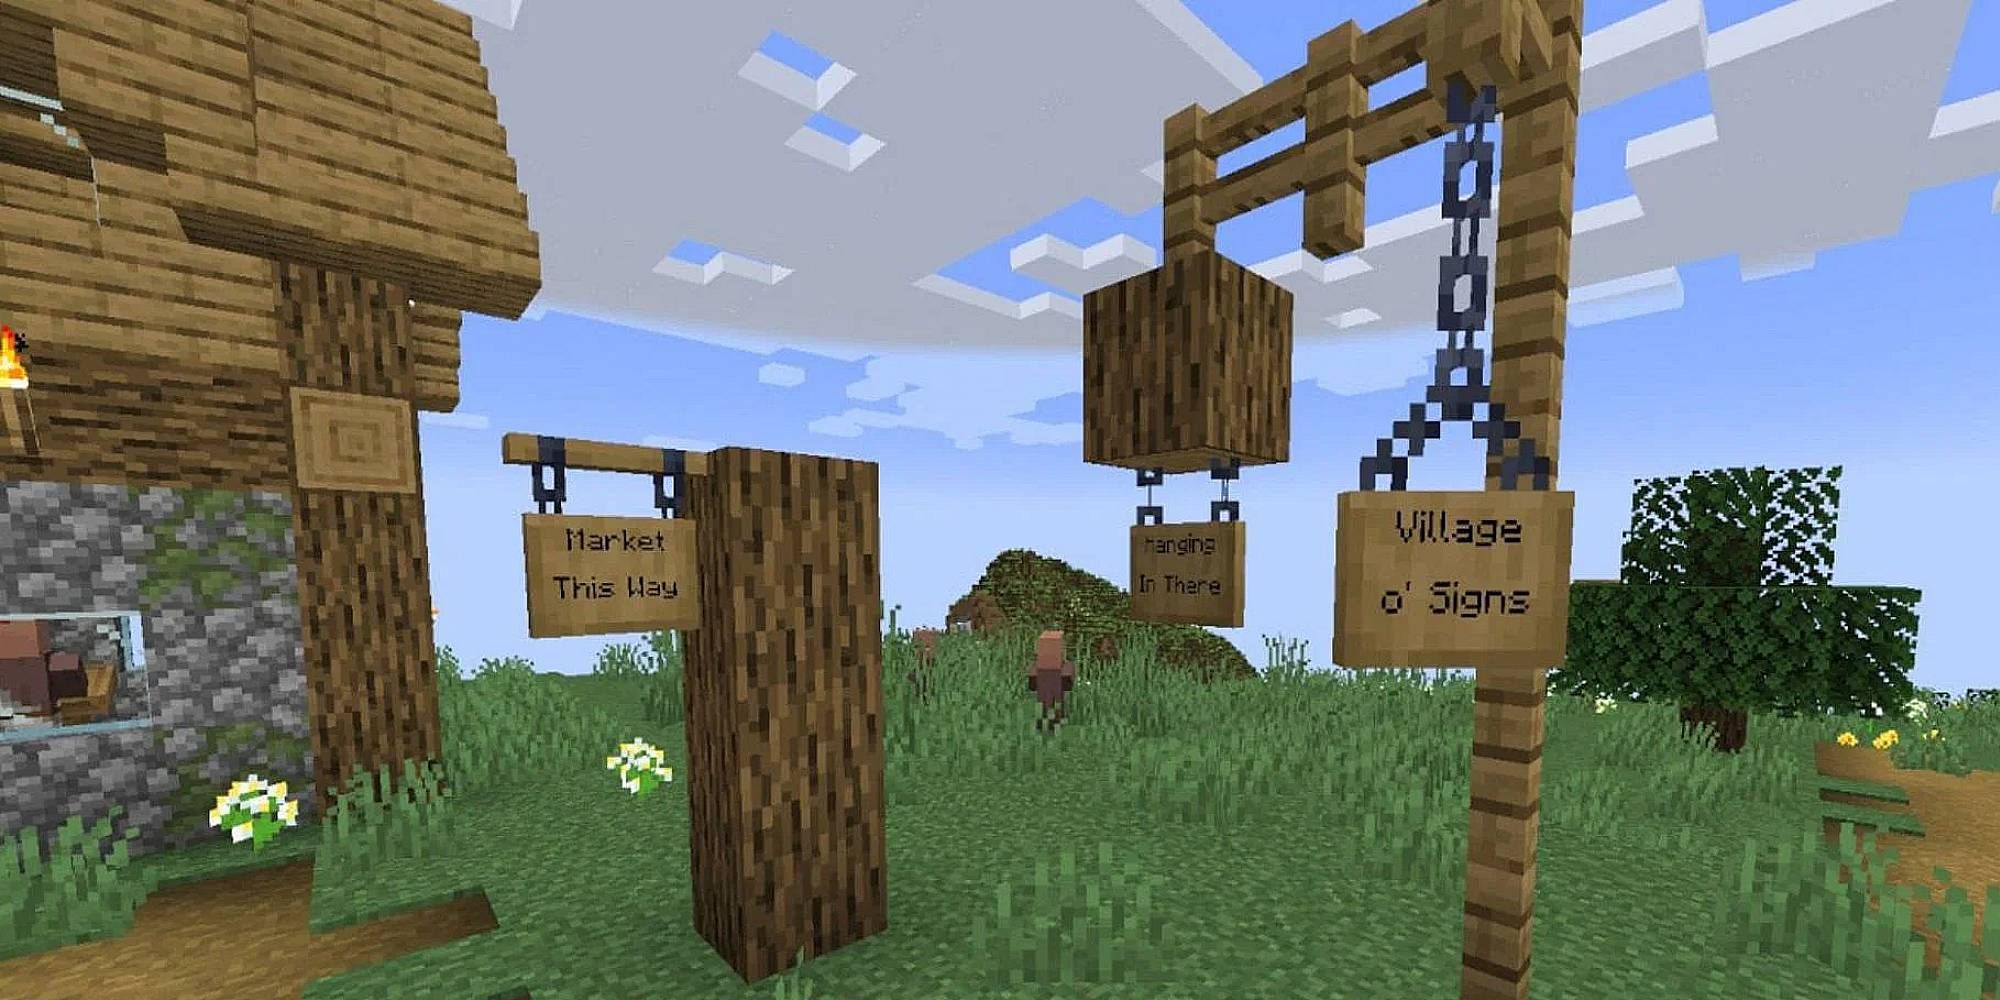 A few hanging signs are situated outside a village